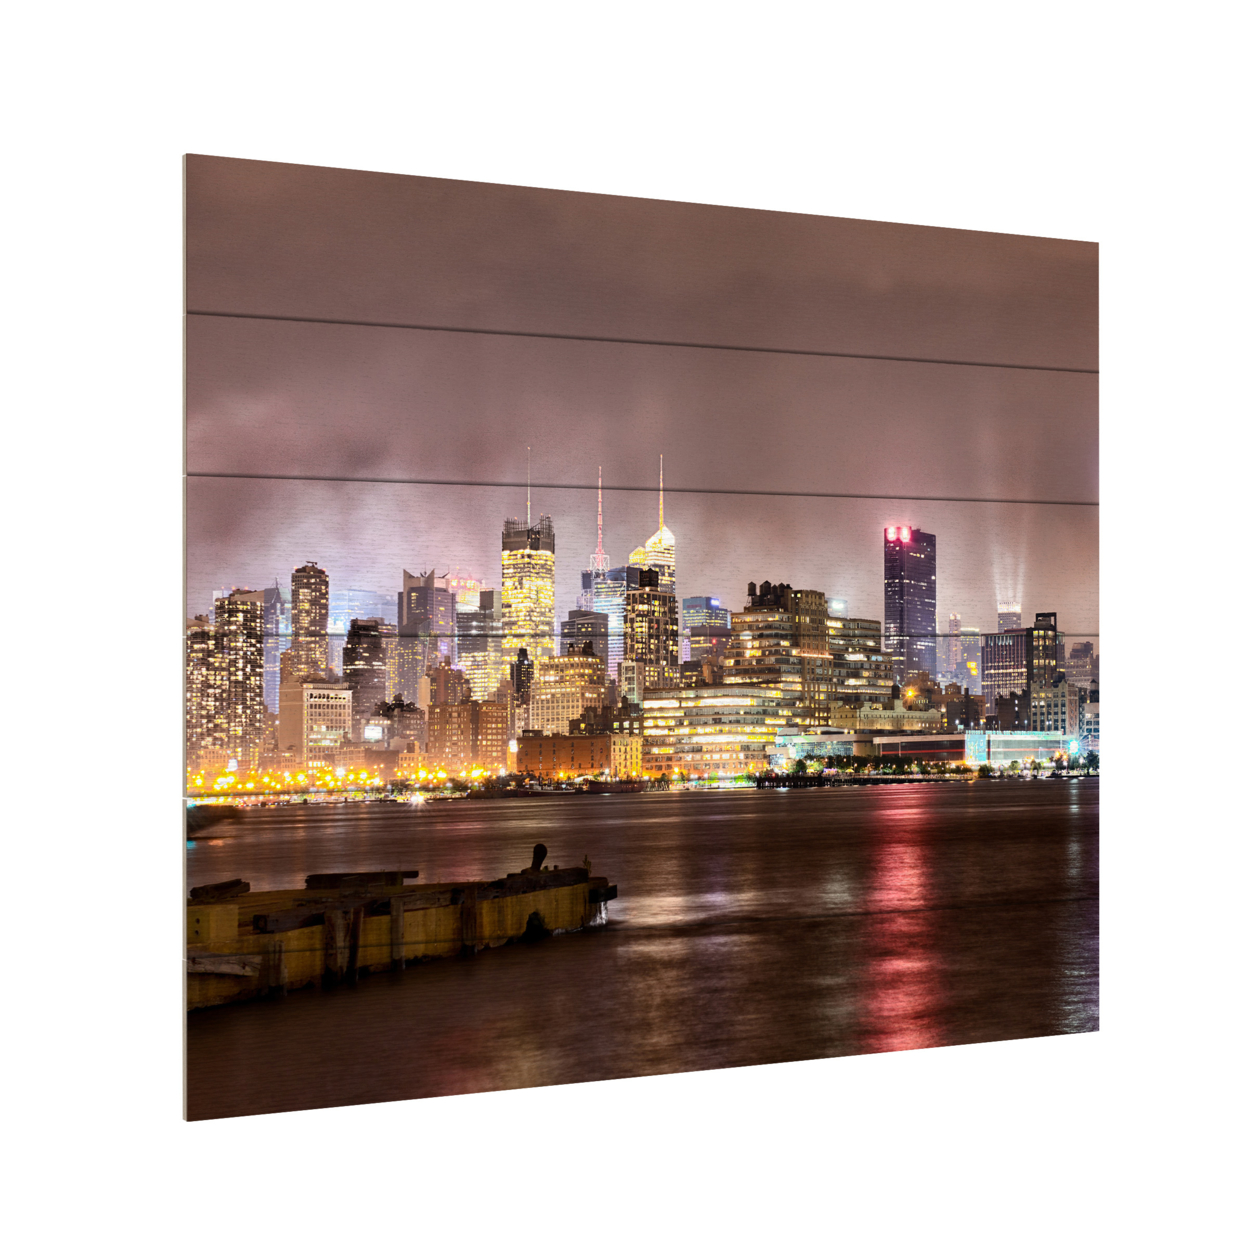 Wooden Slat Art 18 X 22 Inches Titled Midtown Manhatten Over The Hudson River Ready To Hang Home Decor Picture